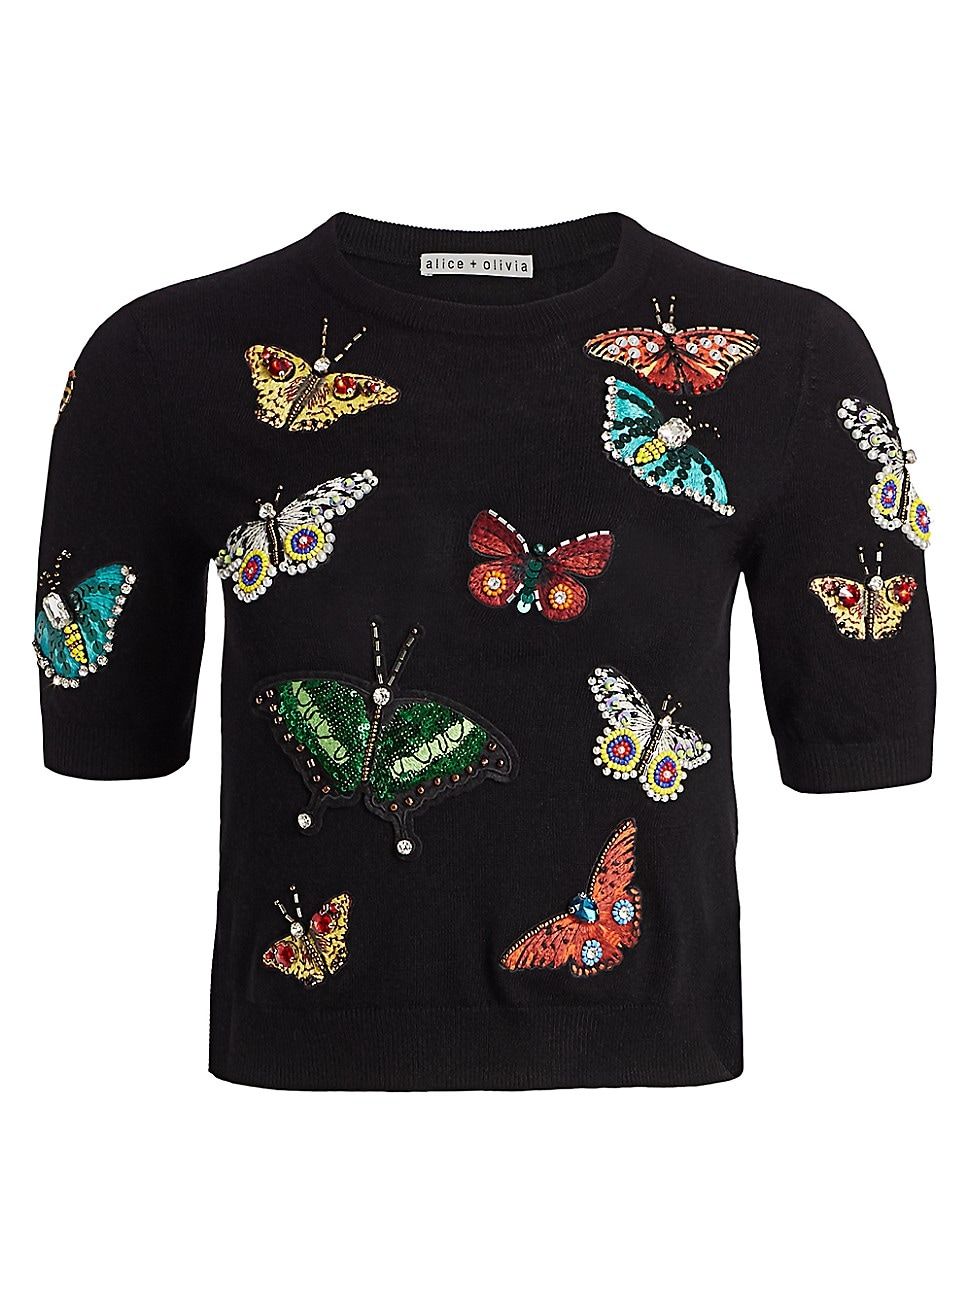 Alice + Olivia Women's Ciara Butterfly Embroidered Sweater - Black Multi - Size XS | Saks Fifth Avenue